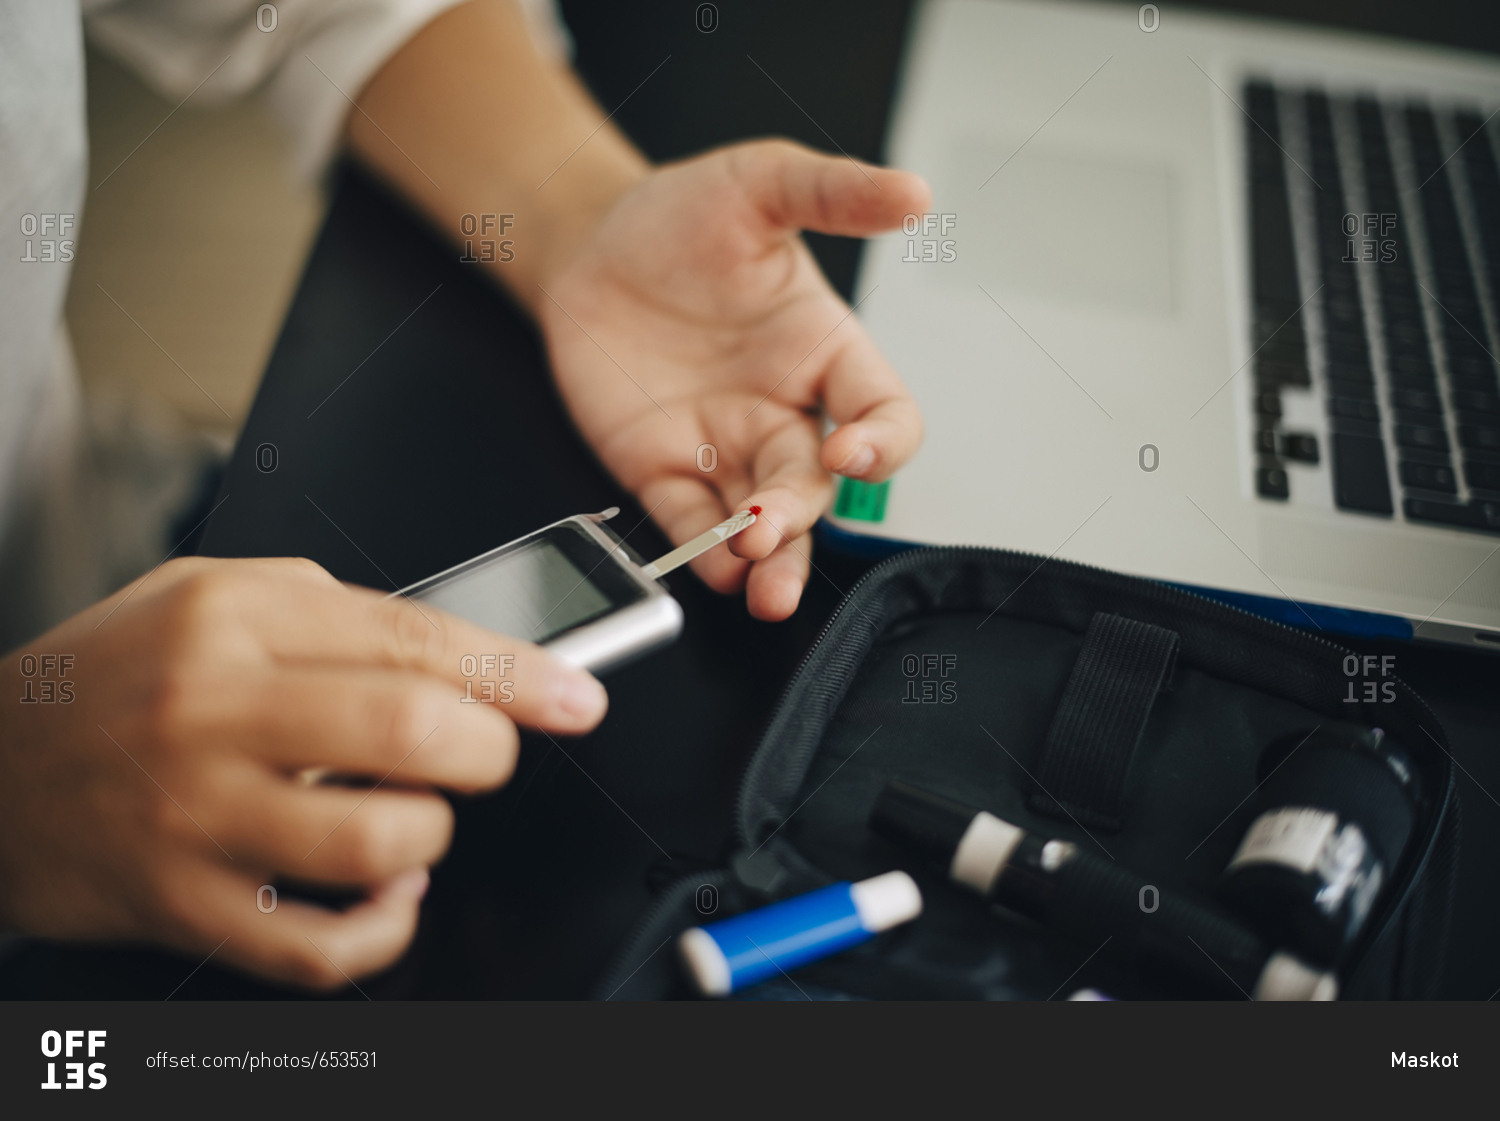 Cropped hands of businesswoman checking blood sugar level with glaucometer at desk